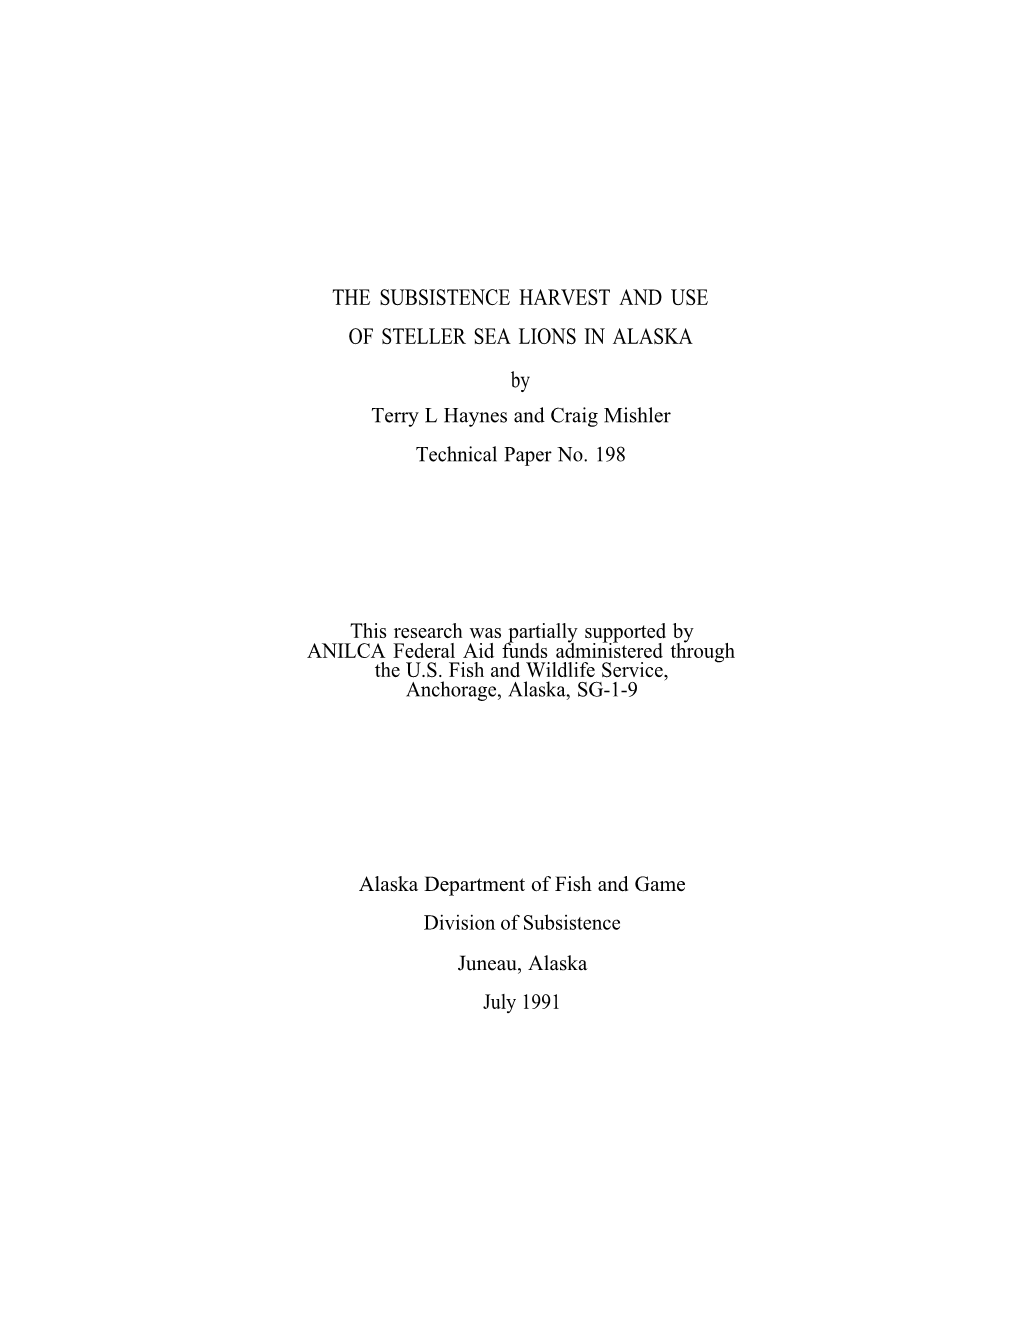 THE SUBSISTENCE HARVEST and USE of STELLER SEA LIONS in ALASKA by Terry L Haynes and Craig Mishler Technical Paper No